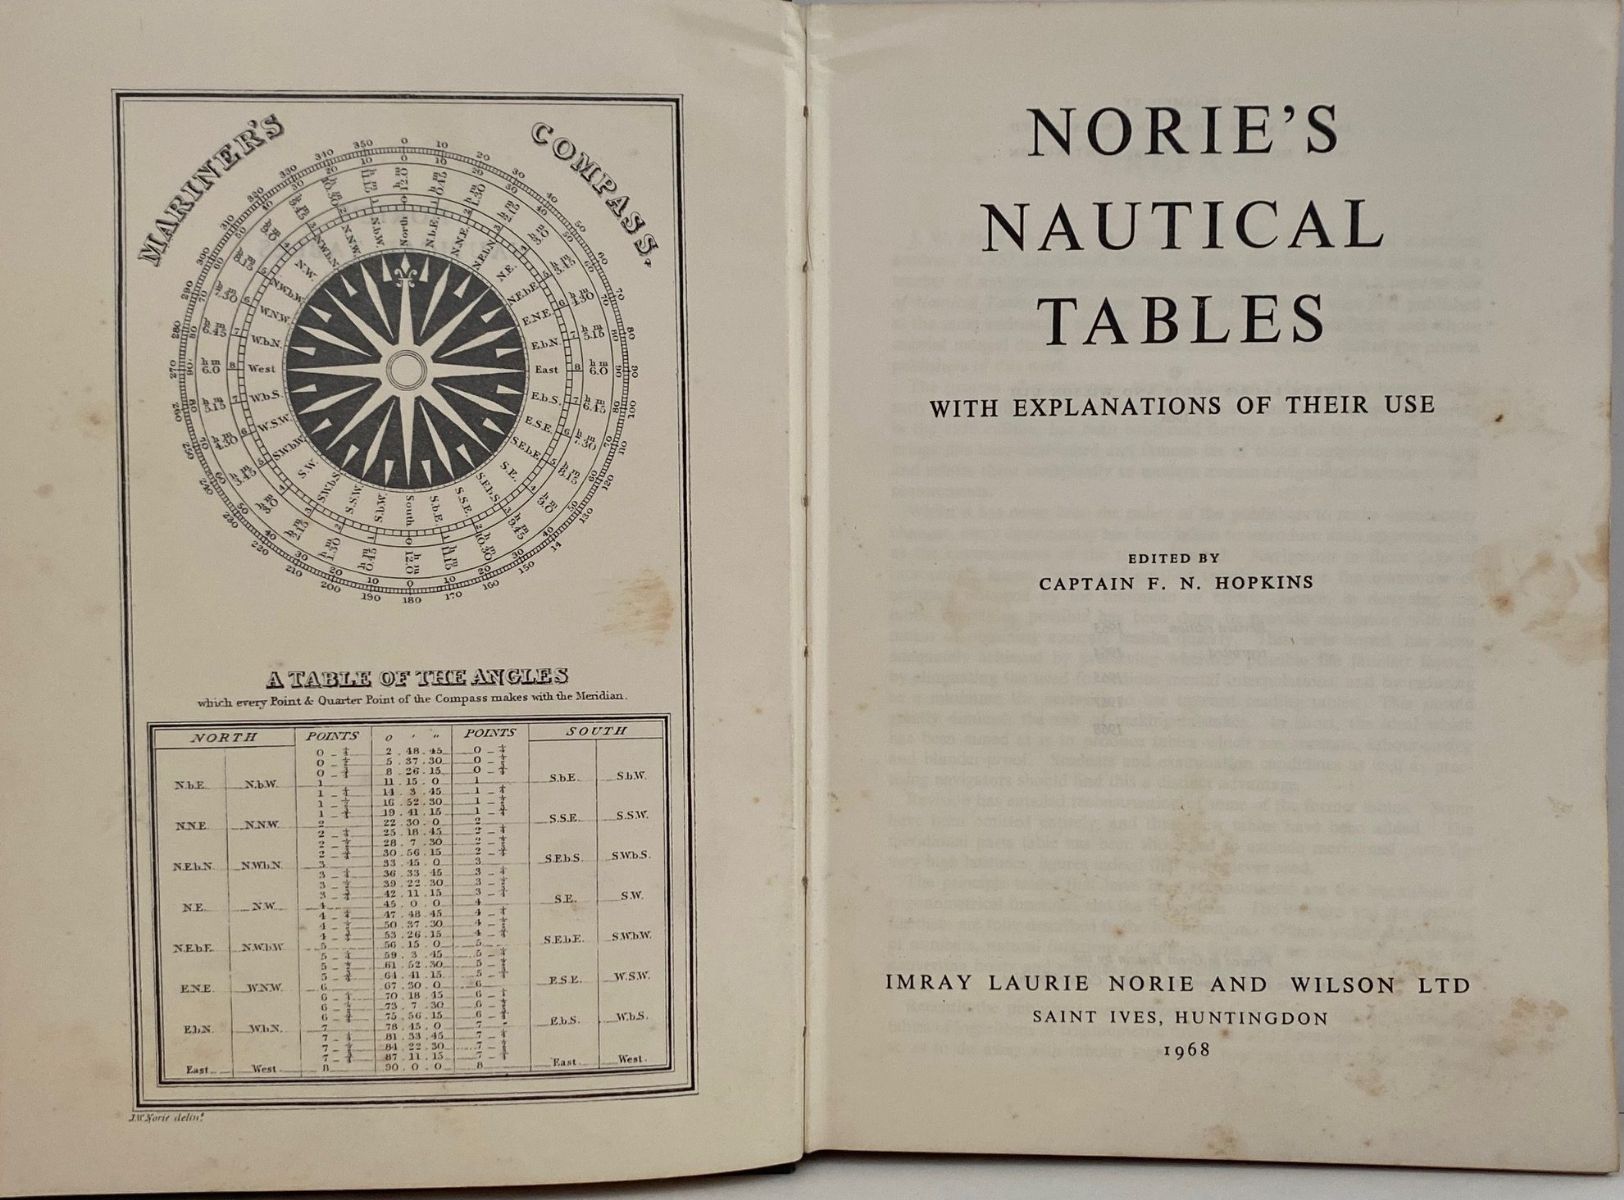 NORIE'S NAUTICAL TABLES: With Explanations of Their Use